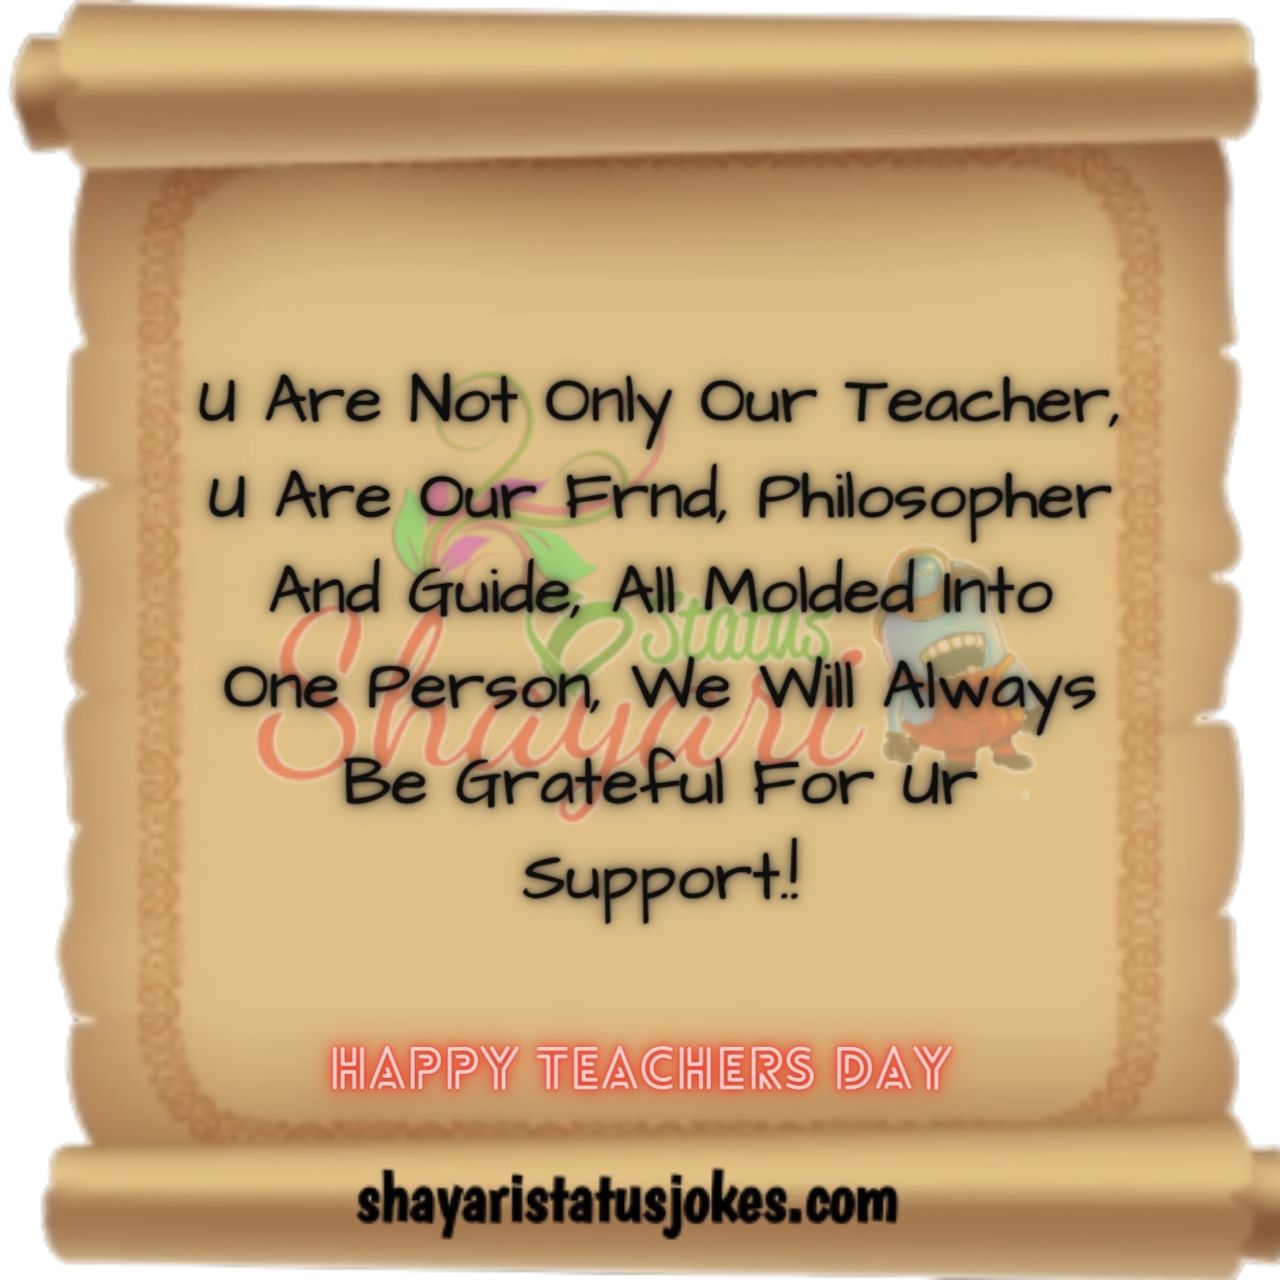 Teacher Day thoughts and shayari for childhood teachers day shayari in urdu teachers day shayari in english teacher day shayari in hindi pdf shayari f